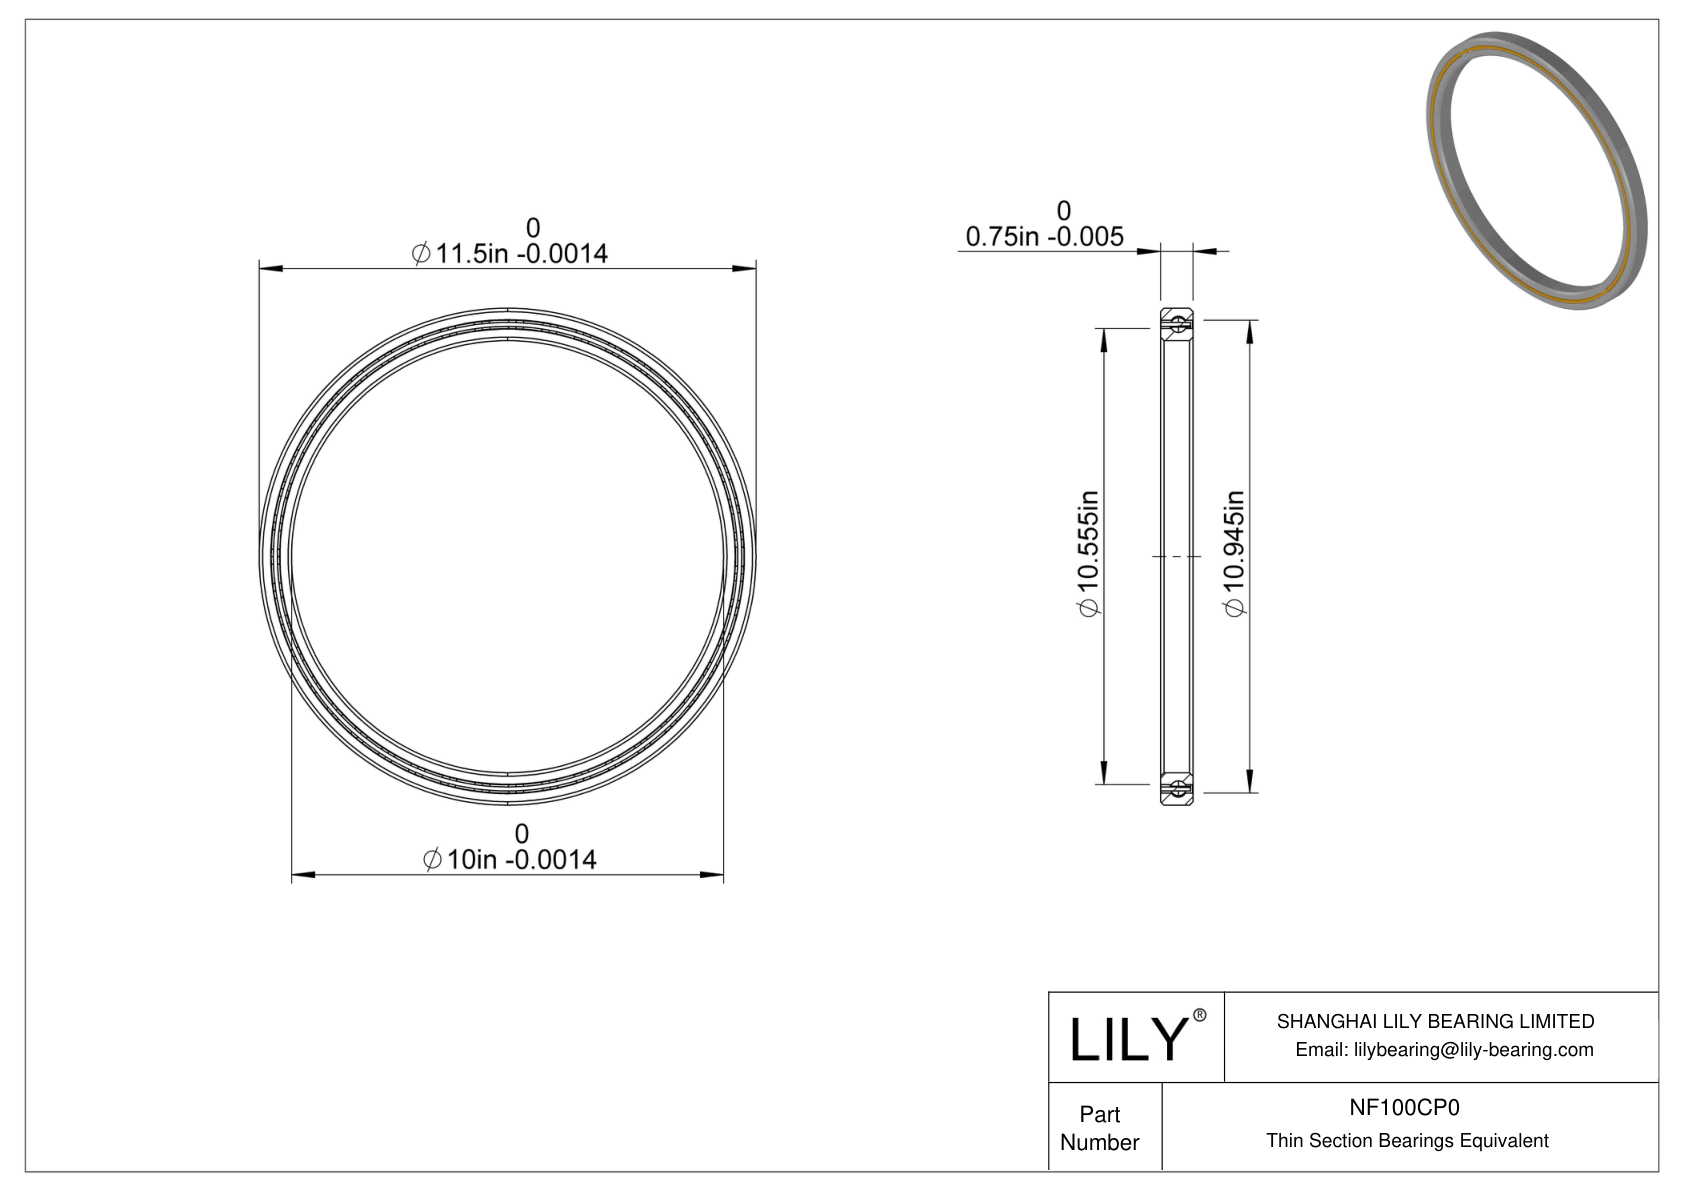 NF100CP0 Constant Section (CS) Bearings cad drawing